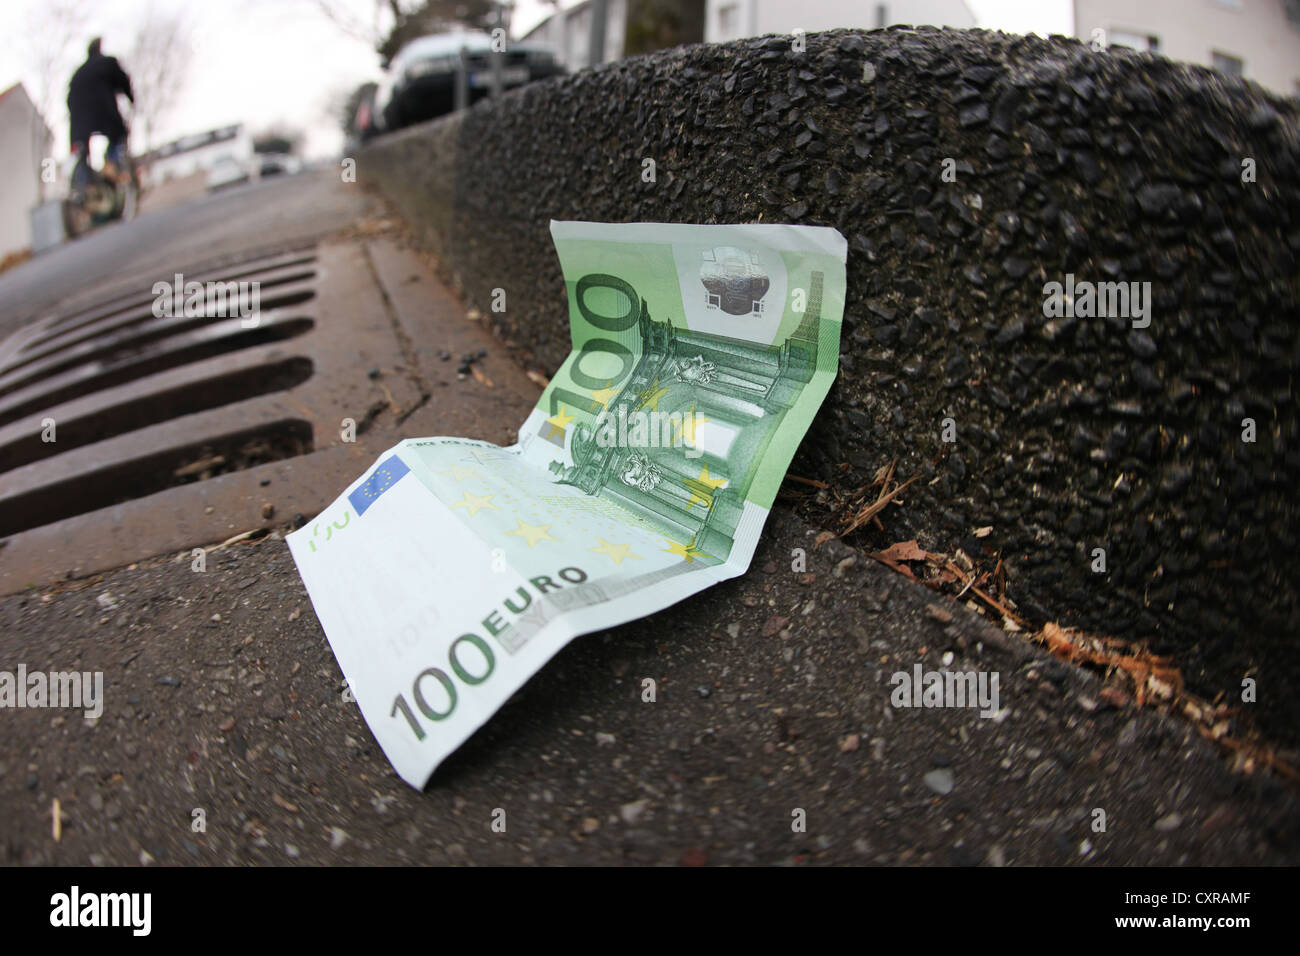 Euro banknote, gutter, drain, symbolic image, money lying on the streets Stock Photo